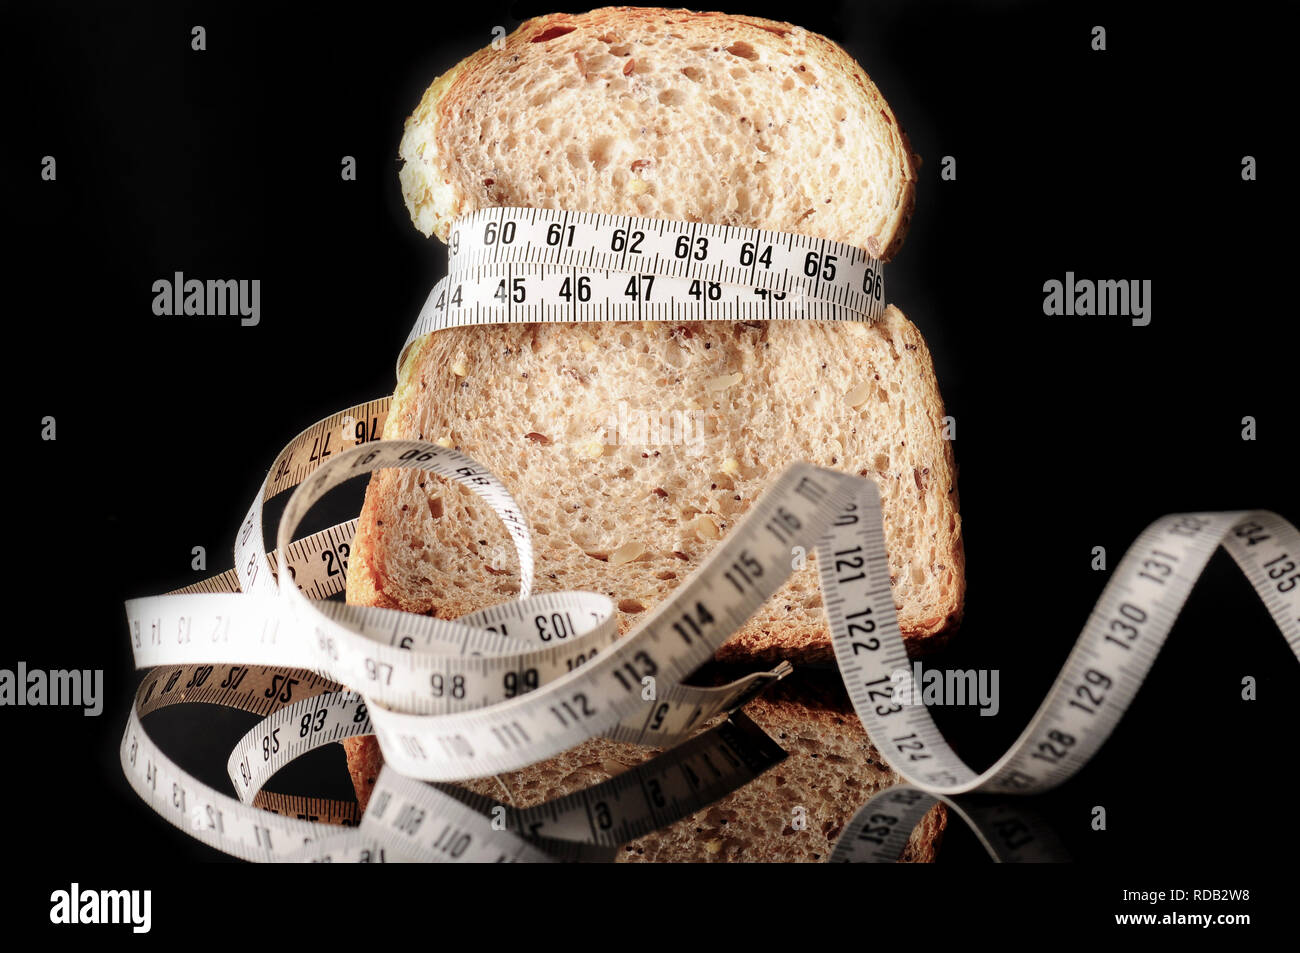 A slice of bread surrounded by a measurement tape on black with reflection Stock Photo